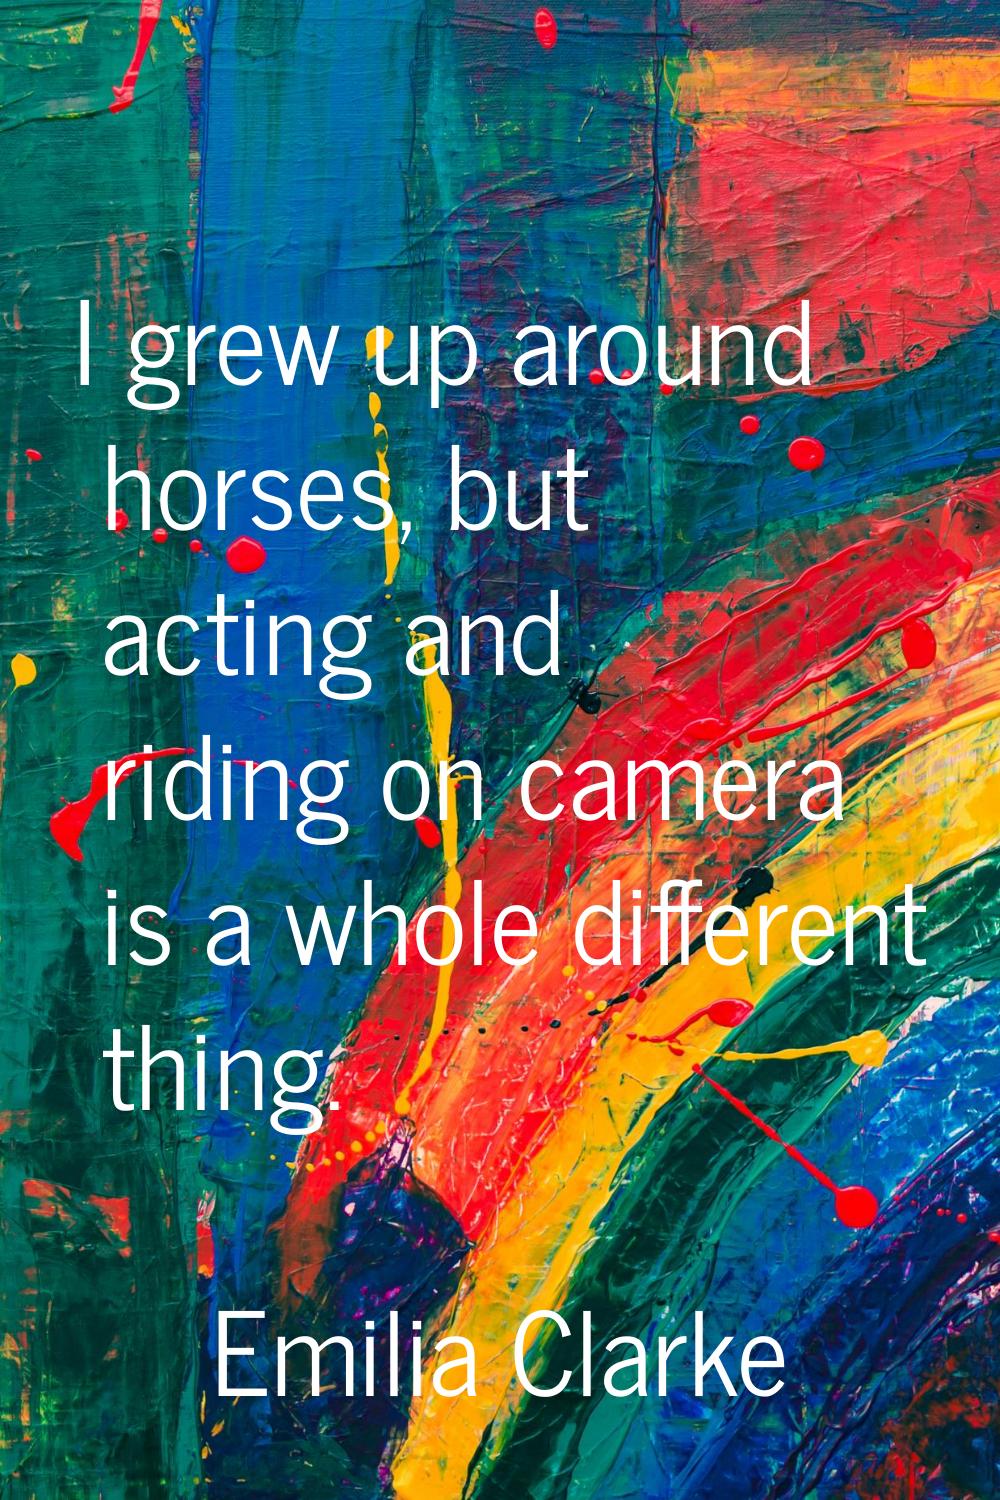 I grew up around horses, but acting and riding on camera is a whole different thing.